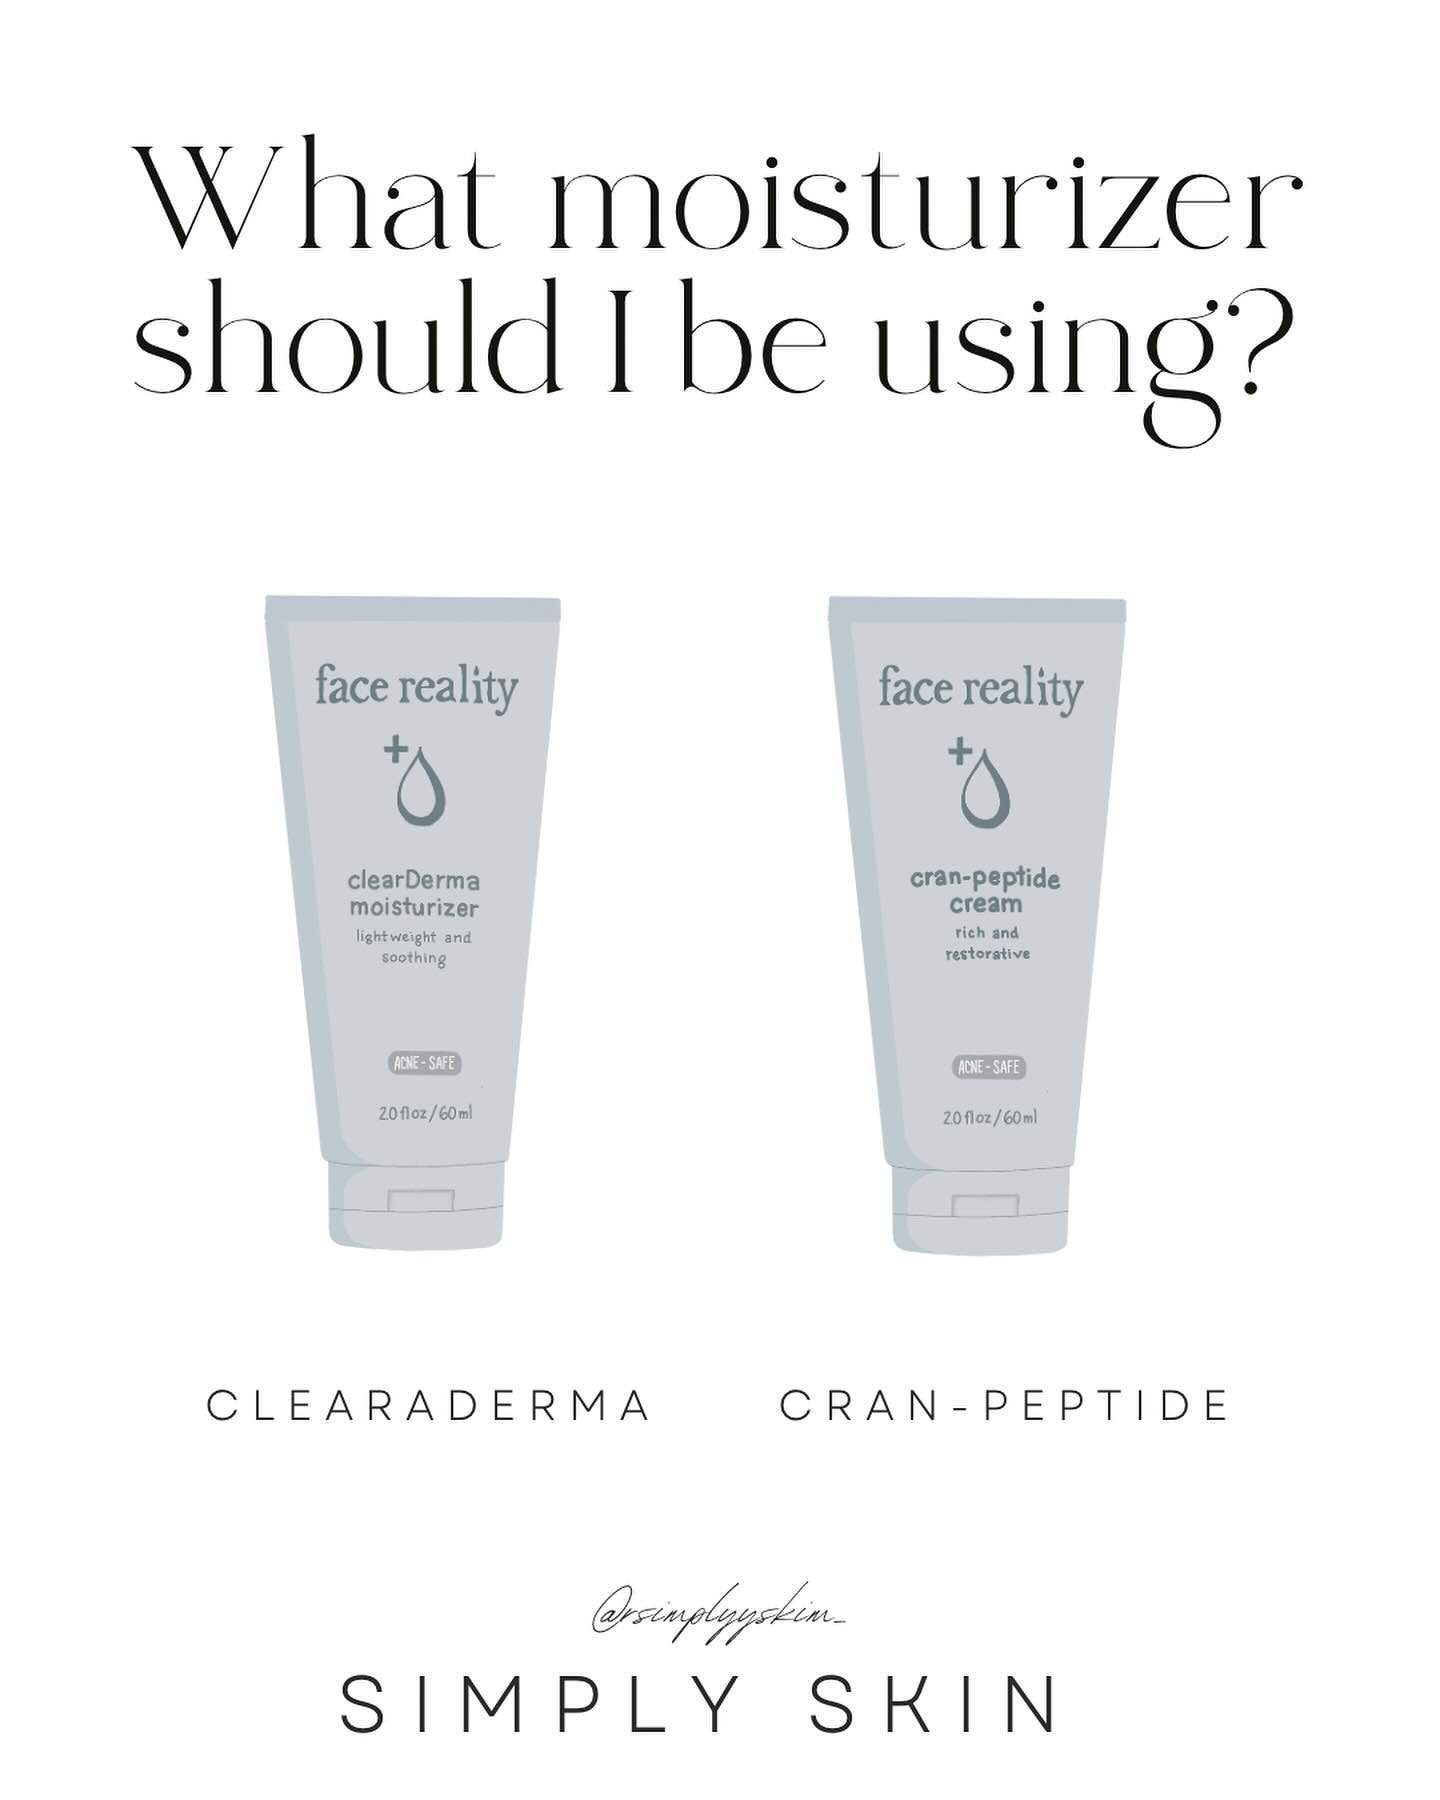 Moisturizer&rsquo;s 🥷🏻

Swipe to find your perfect moisturizer🔛 

If you&rsquo;re someone who doesn&rsquo;t understand the concept of moisturizer, let me explain! 
Tons of people believe that if they have oily or acne prone skin that they should
a